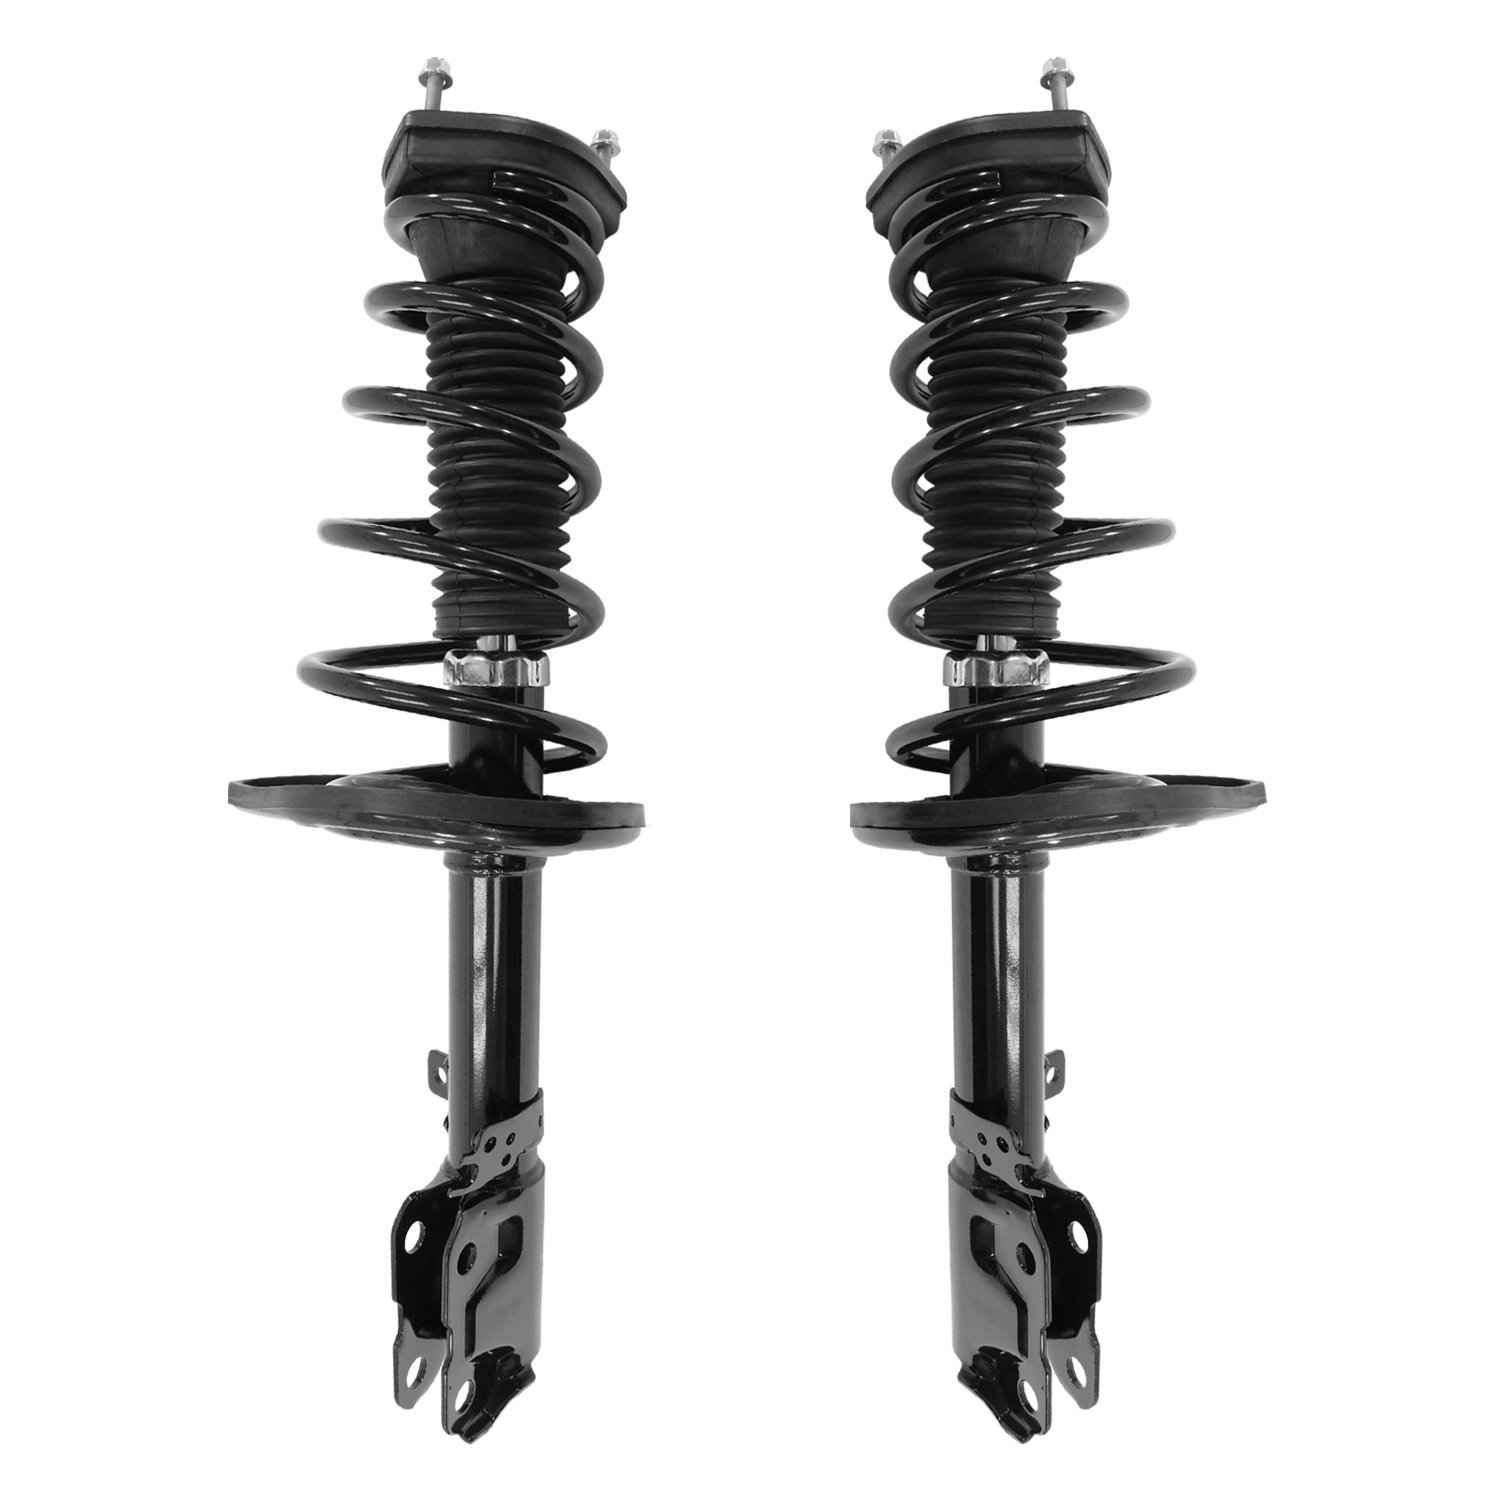 2-16081-16082-001 Rear Suspension Strut & Coil Spring Assemby Set Fits Select Toyota Avalon